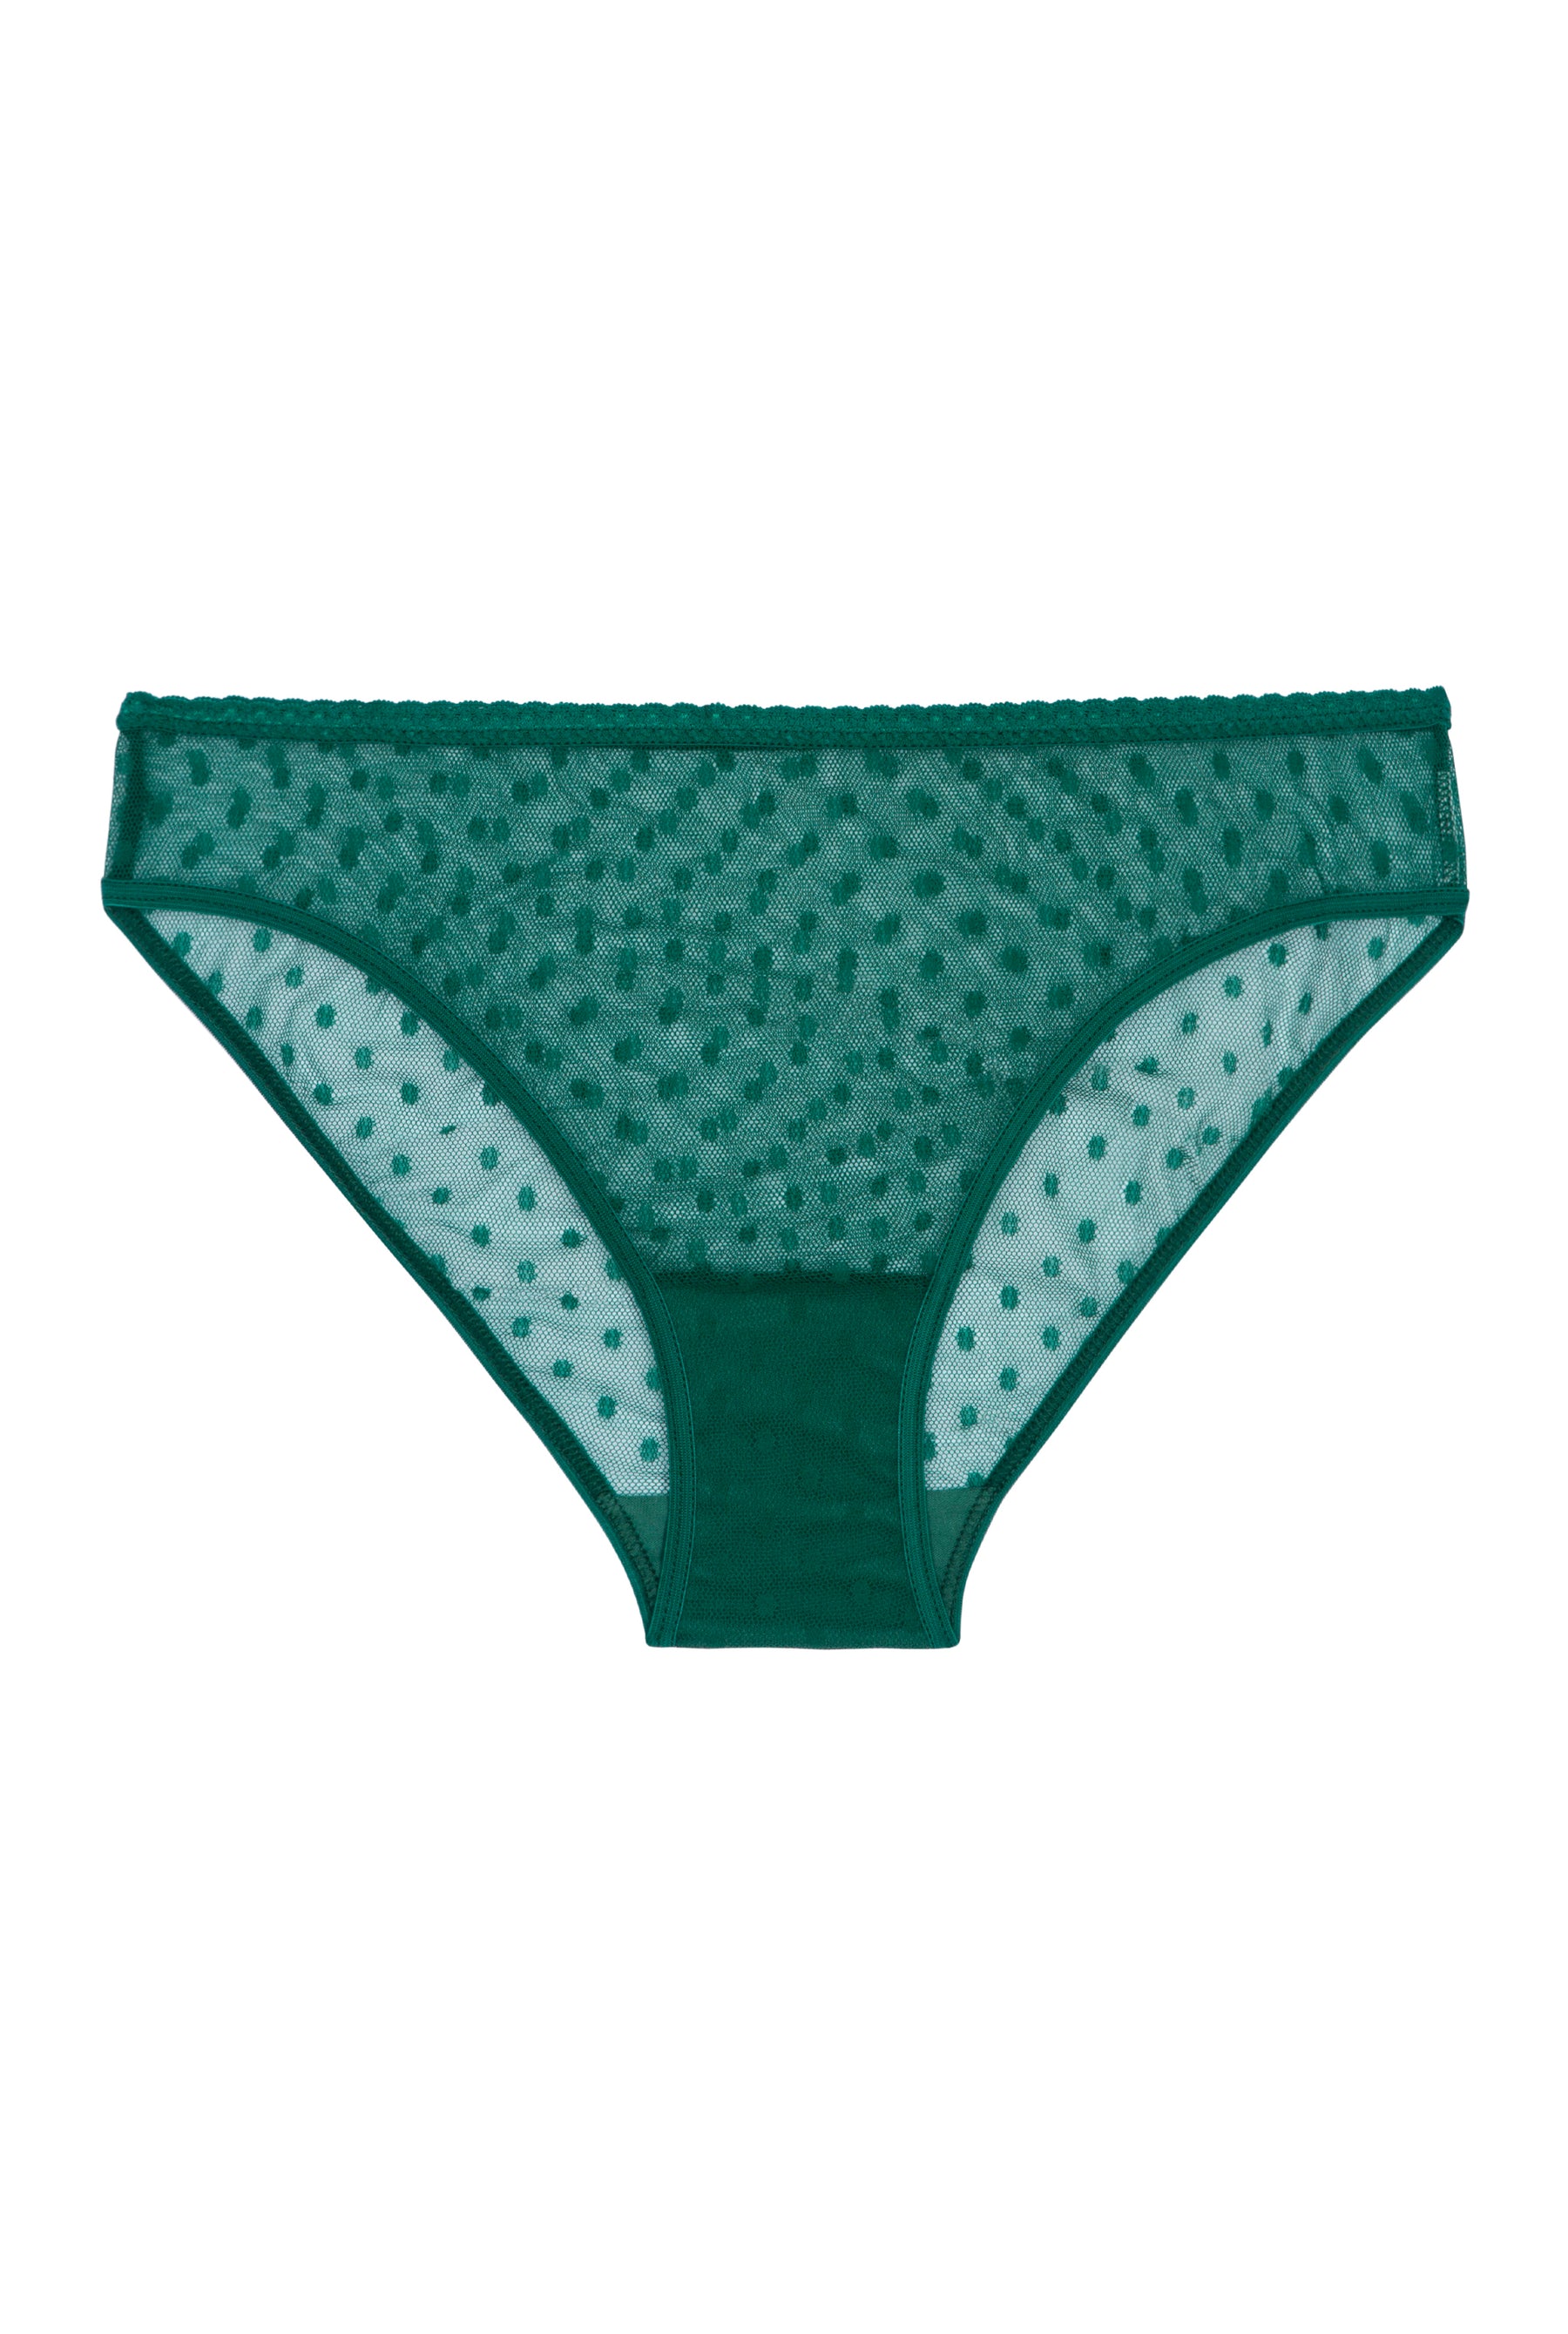 Culotte Tulle Plumetis - Mint Green - We Are Jolies